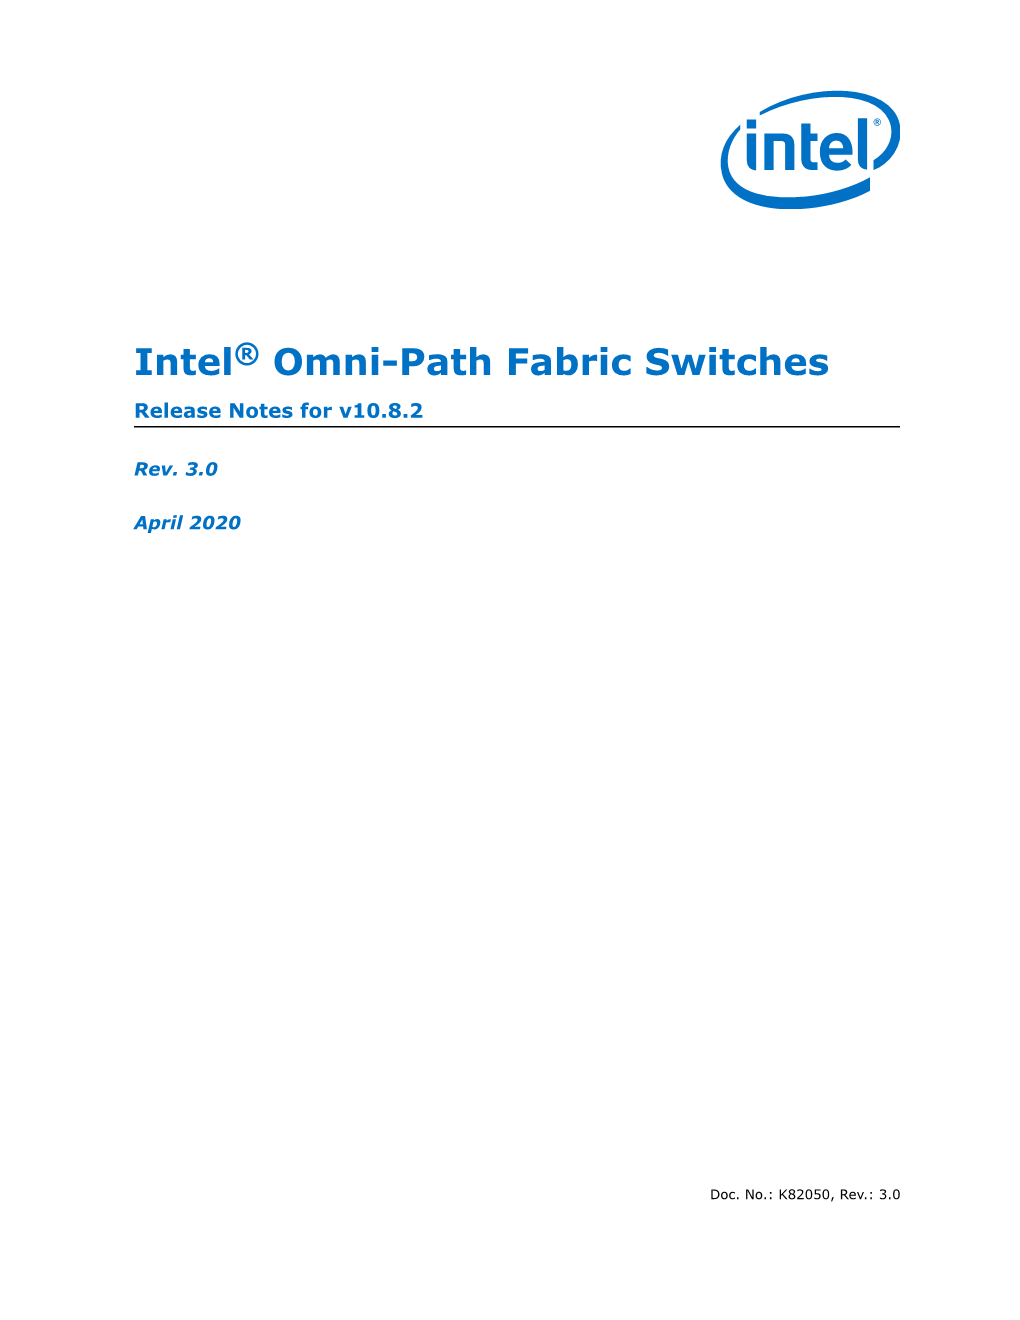 Intel® Omni-Path Fabric Switches — Release Notes for V10.8.2